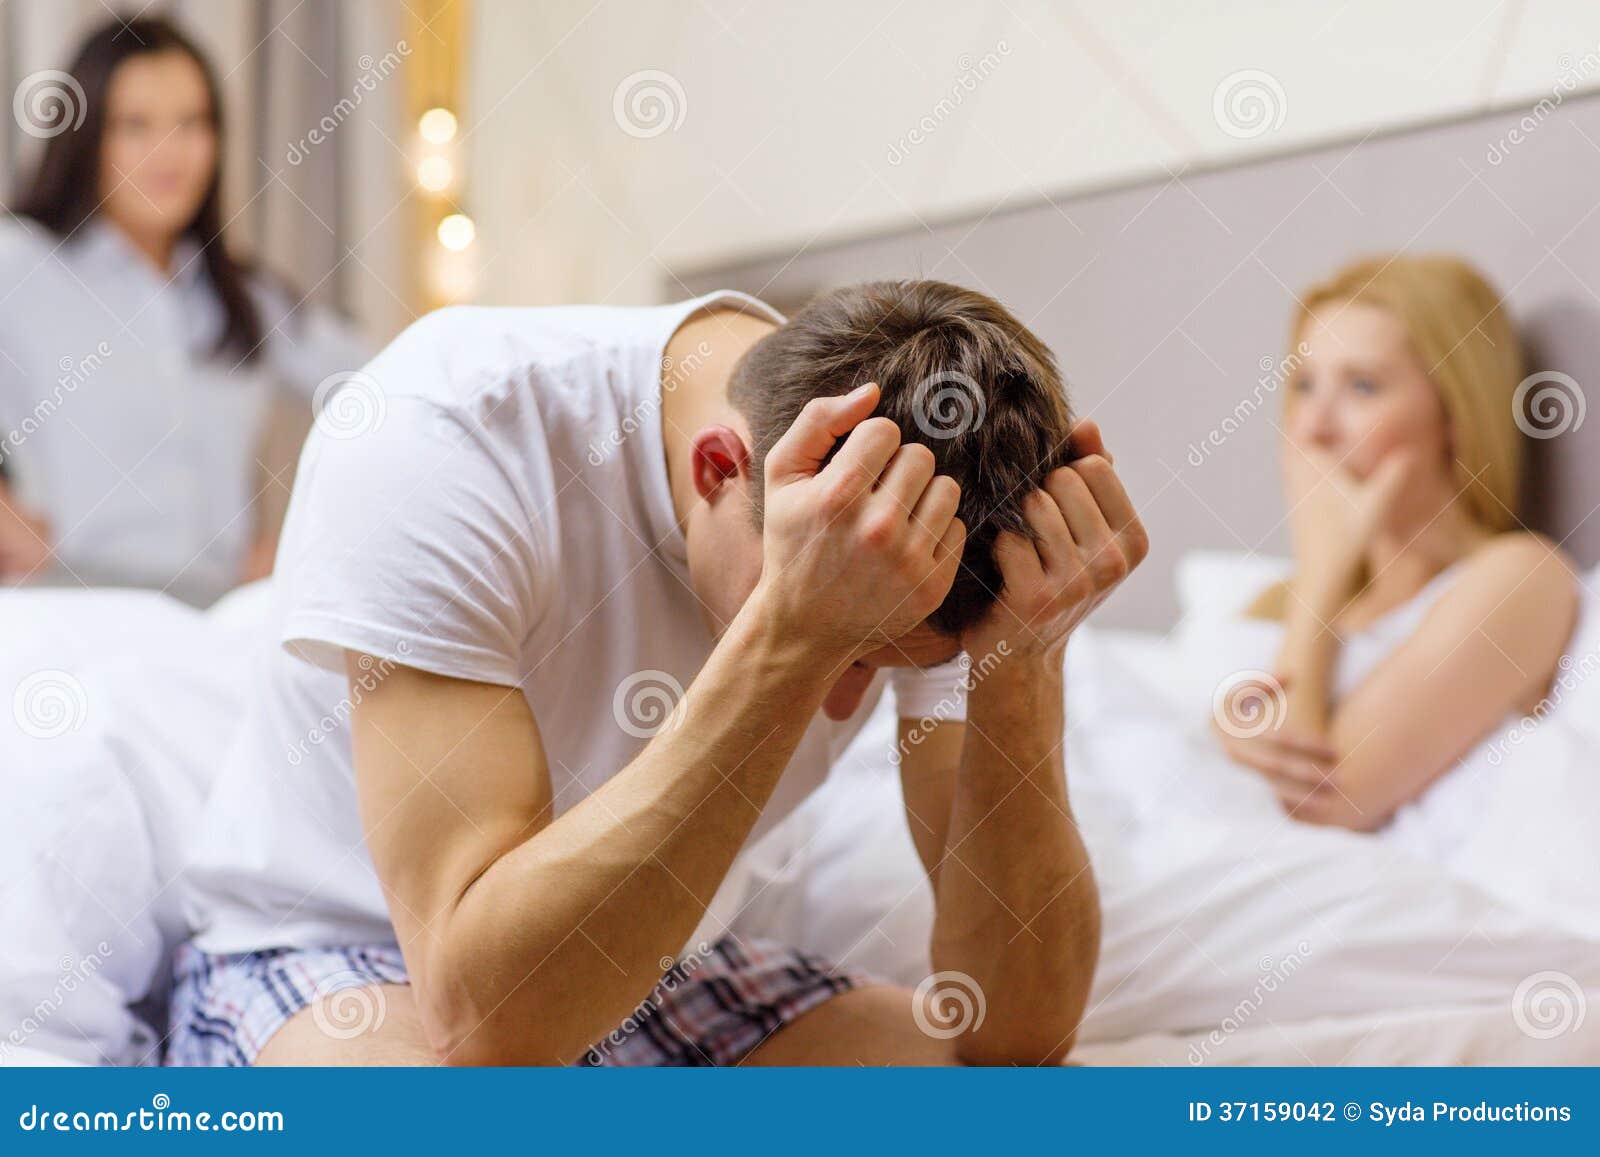 Man Sitting on the Bed with Two Women on the Back Stock Photo pic